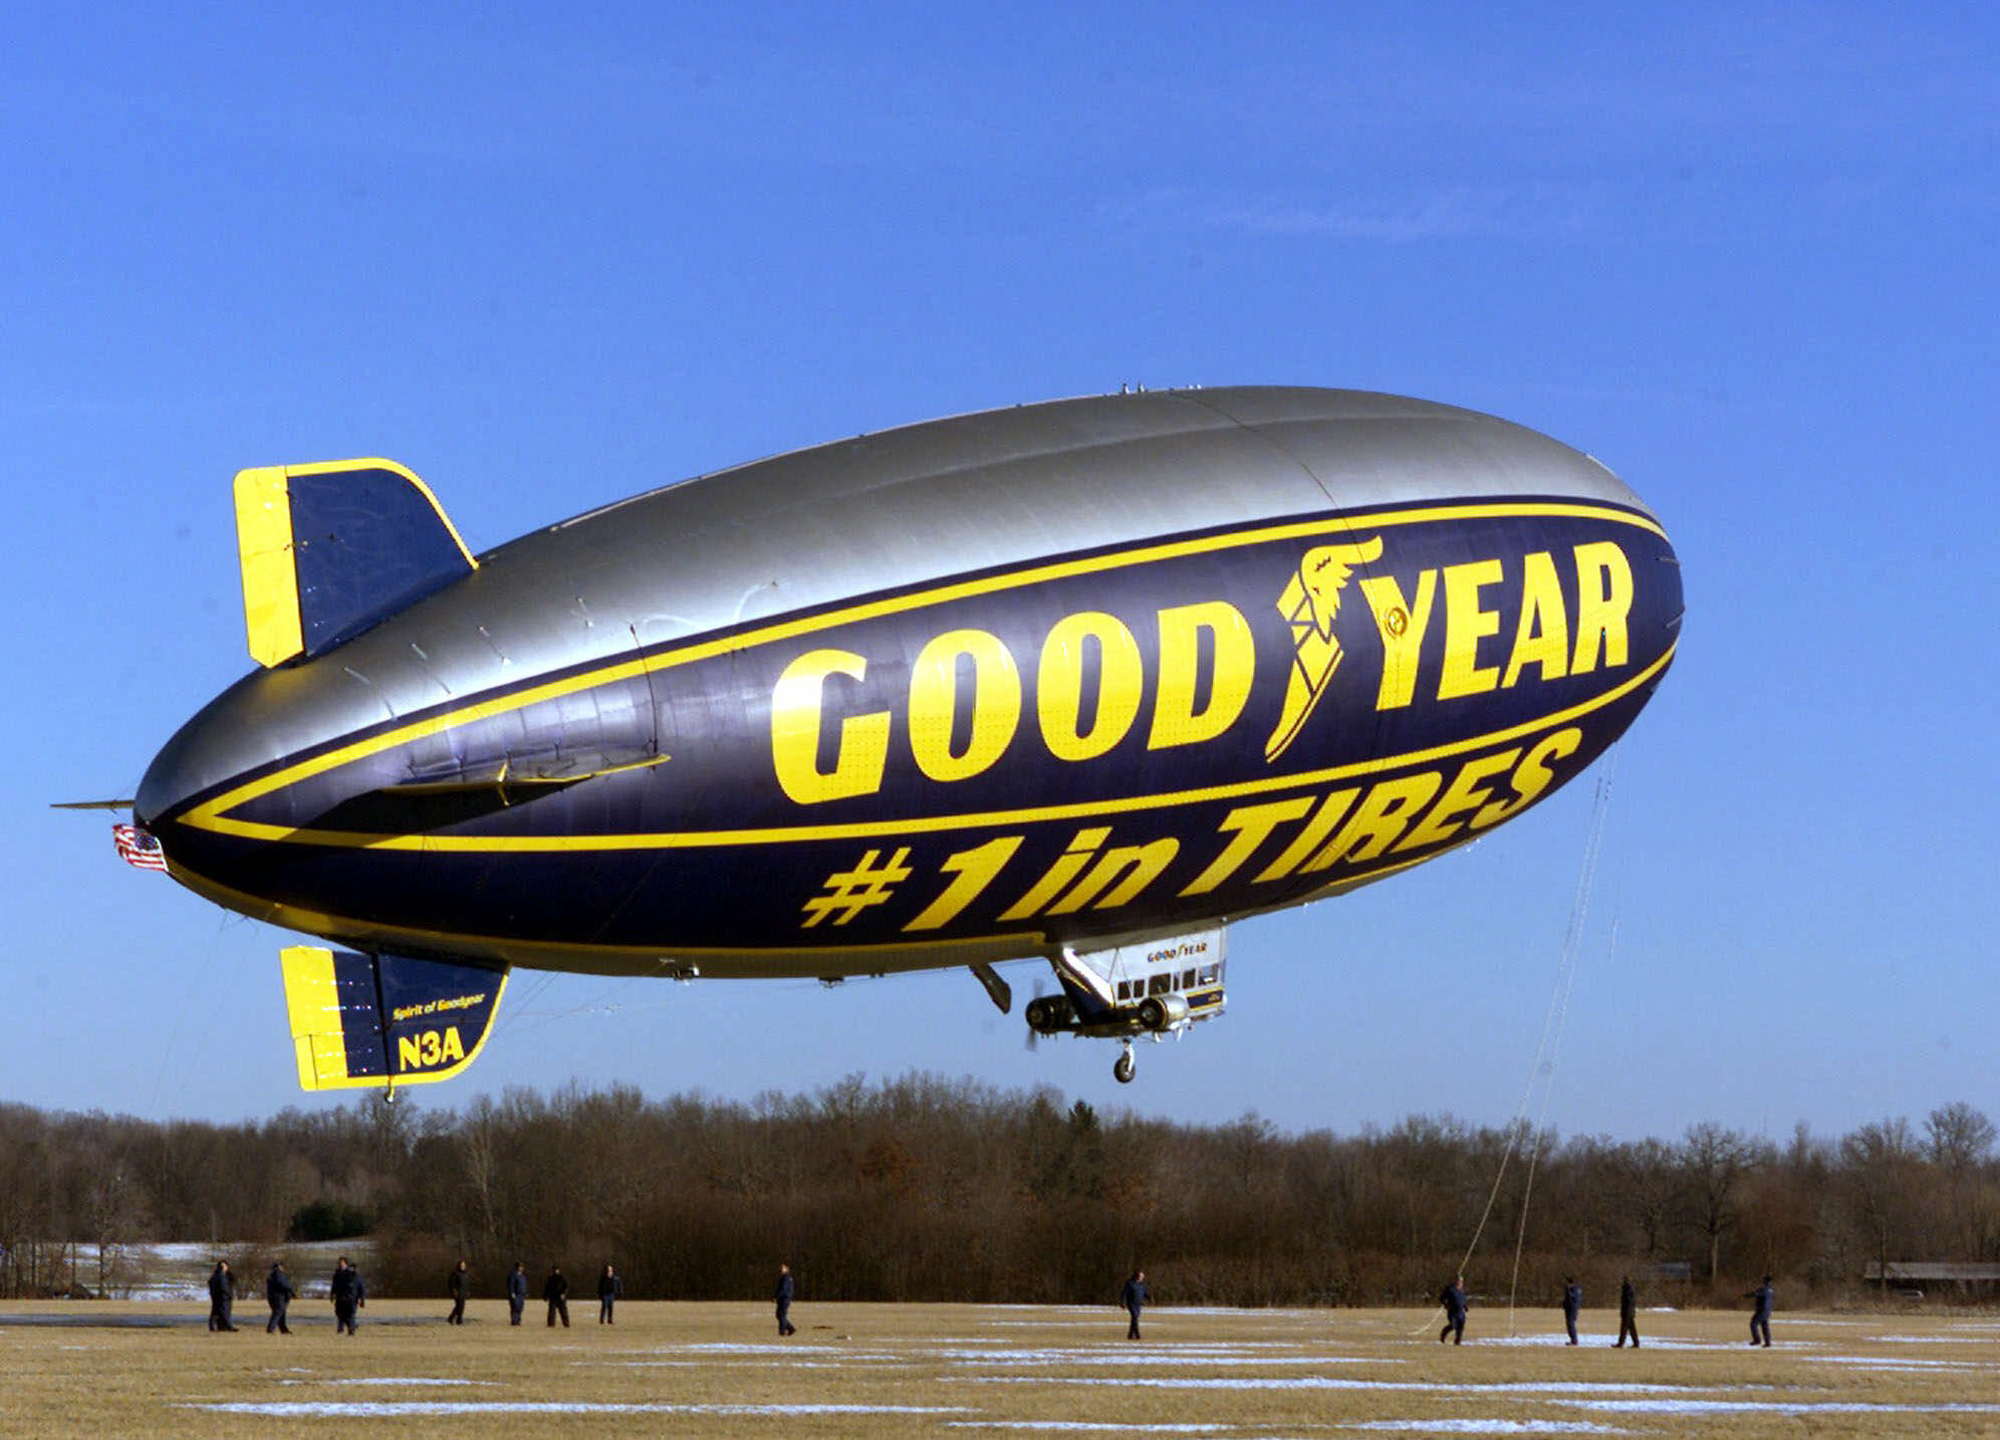 Akron-based Goodyear blimp will retire to Florida - The Blade